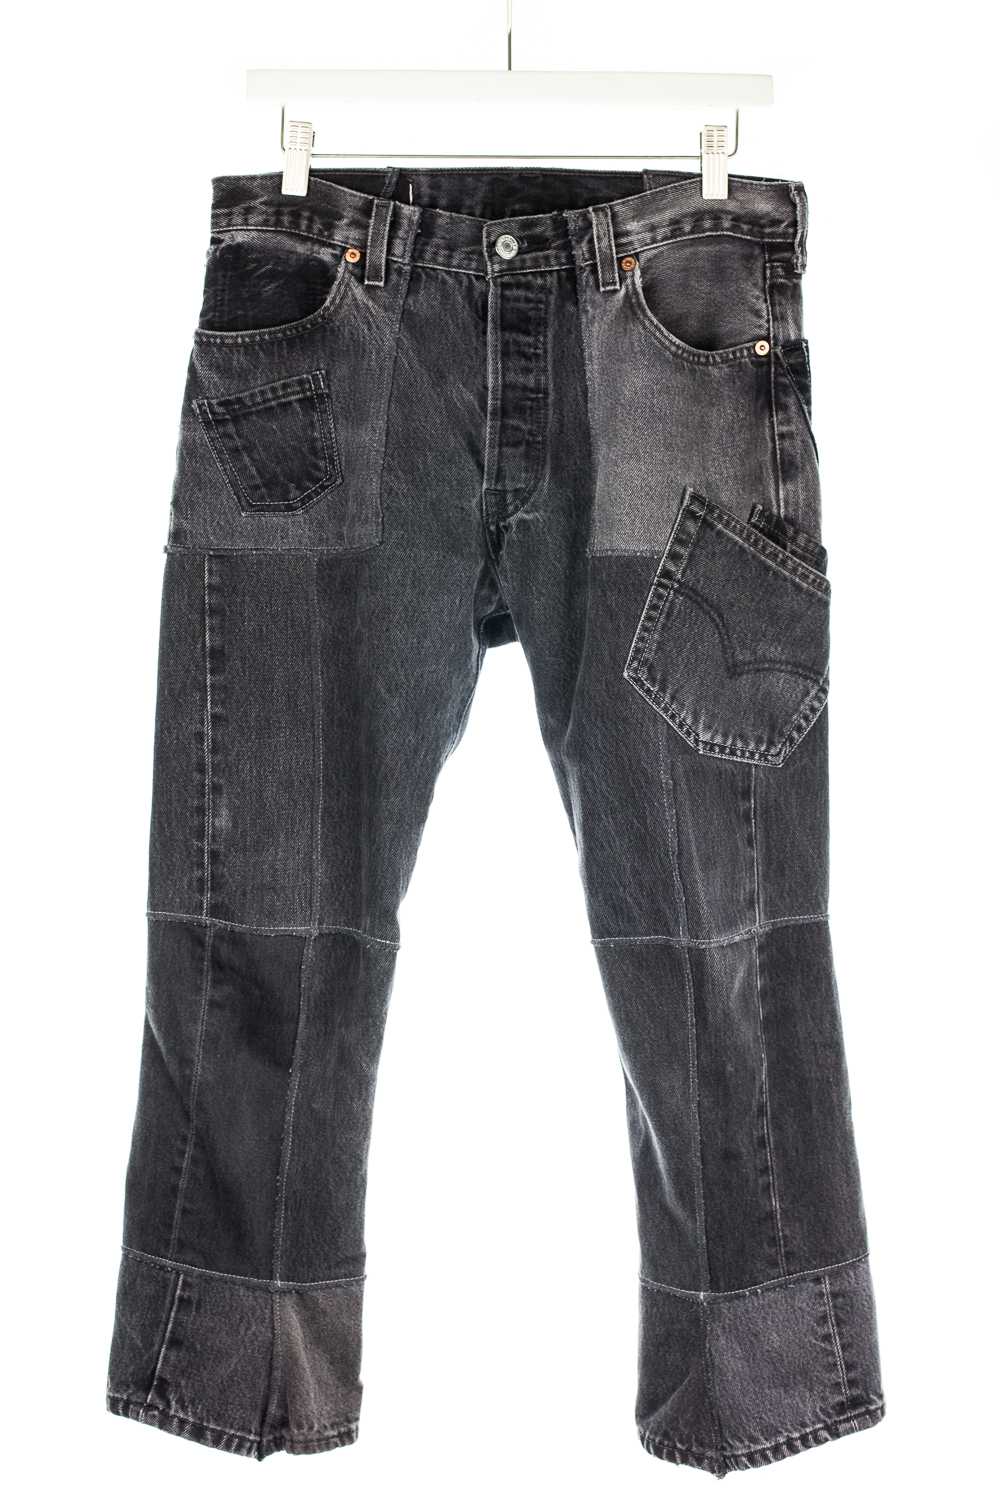 “The Jean” Reconstructed Patchwork Denim (Grey) - image 1